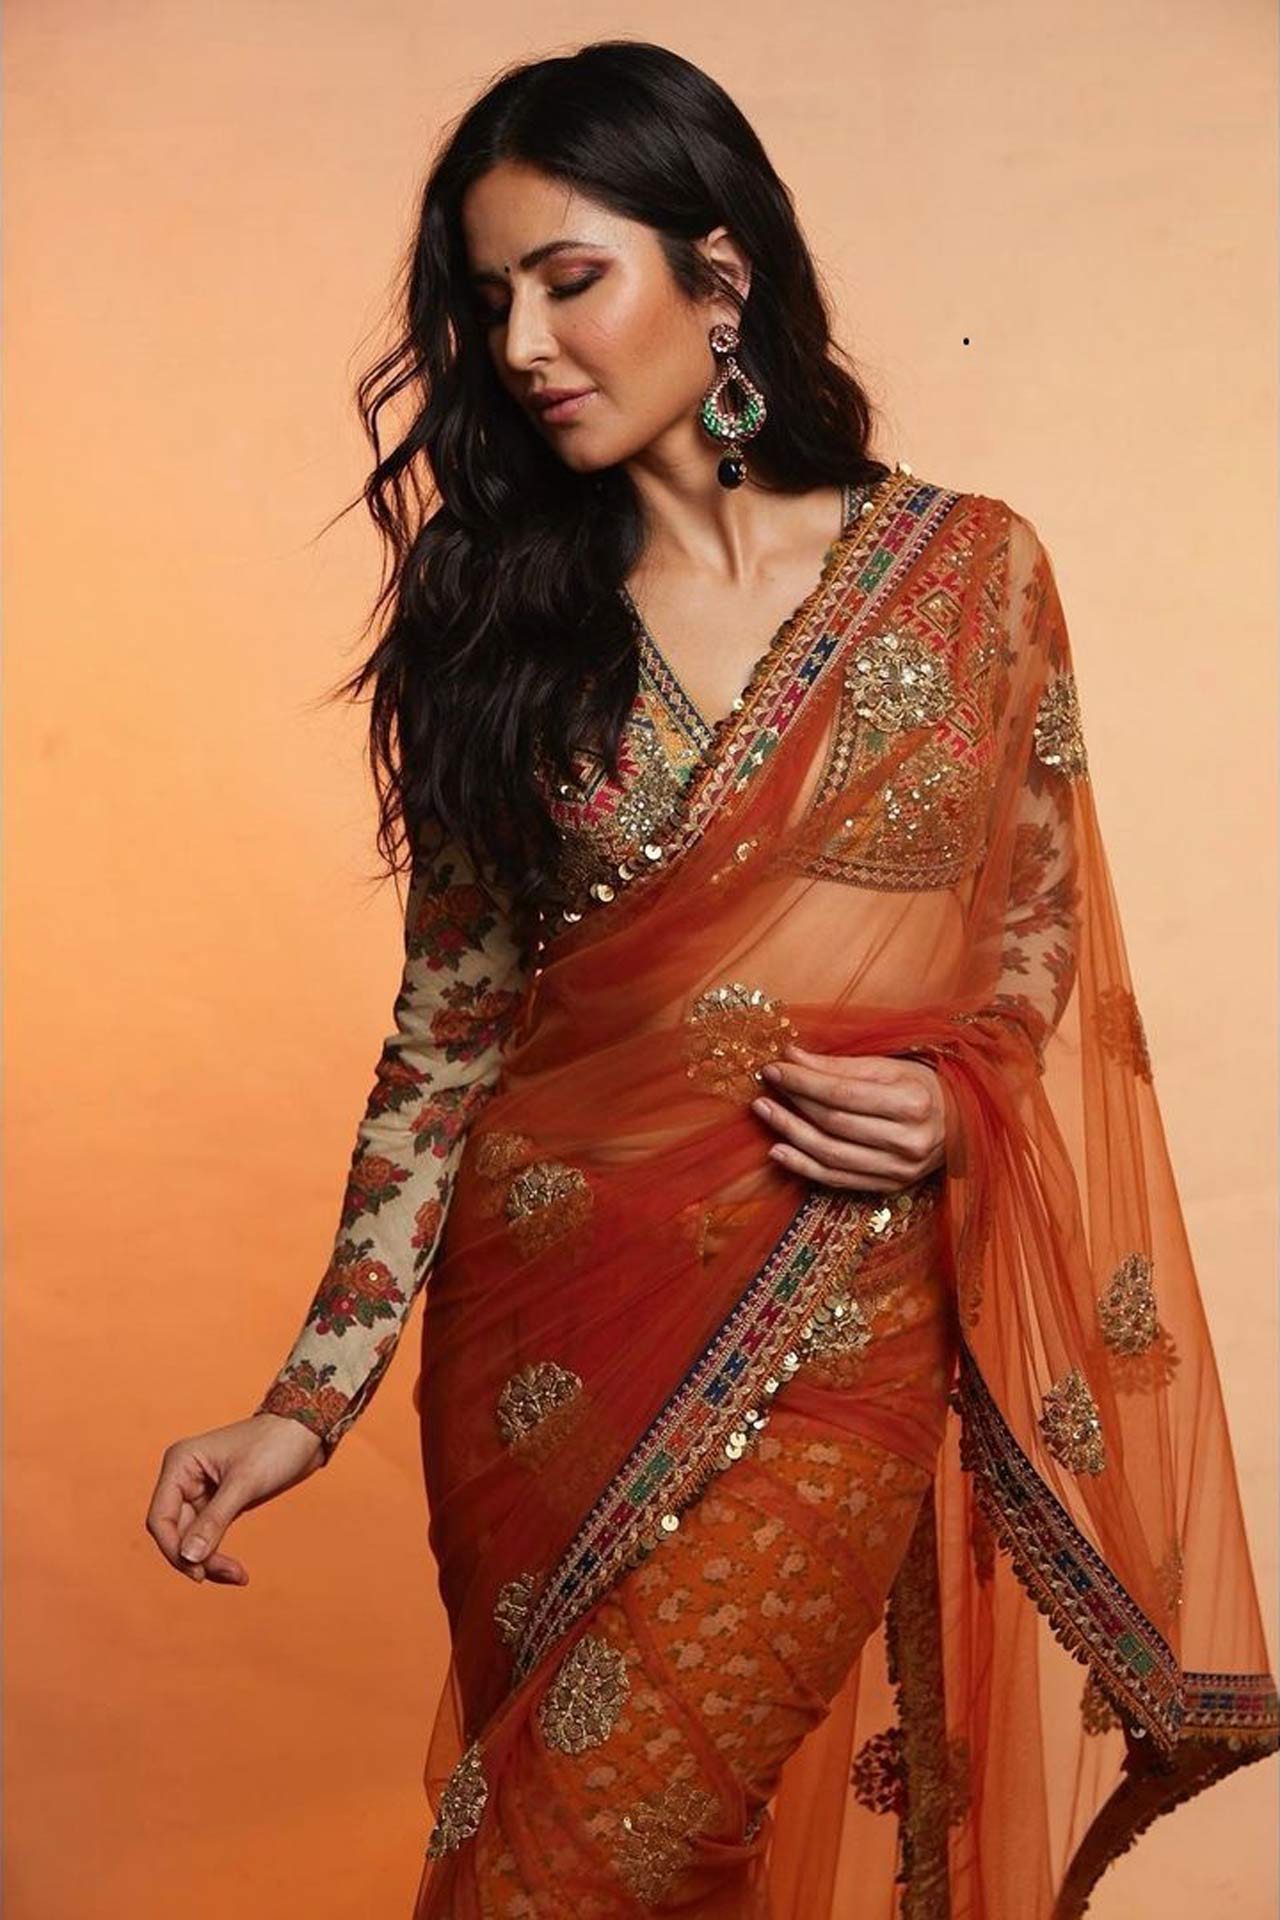 When the actress was promoting her last outing 'Sooryavanshi', Katrina Kaif was seen wearing a Sabyasachi saree for a promotional event. Her mesh six-yard, with embellished saree border and a dash of Rajasthani design, gives this one a perfect pick as a wedding outfit. 